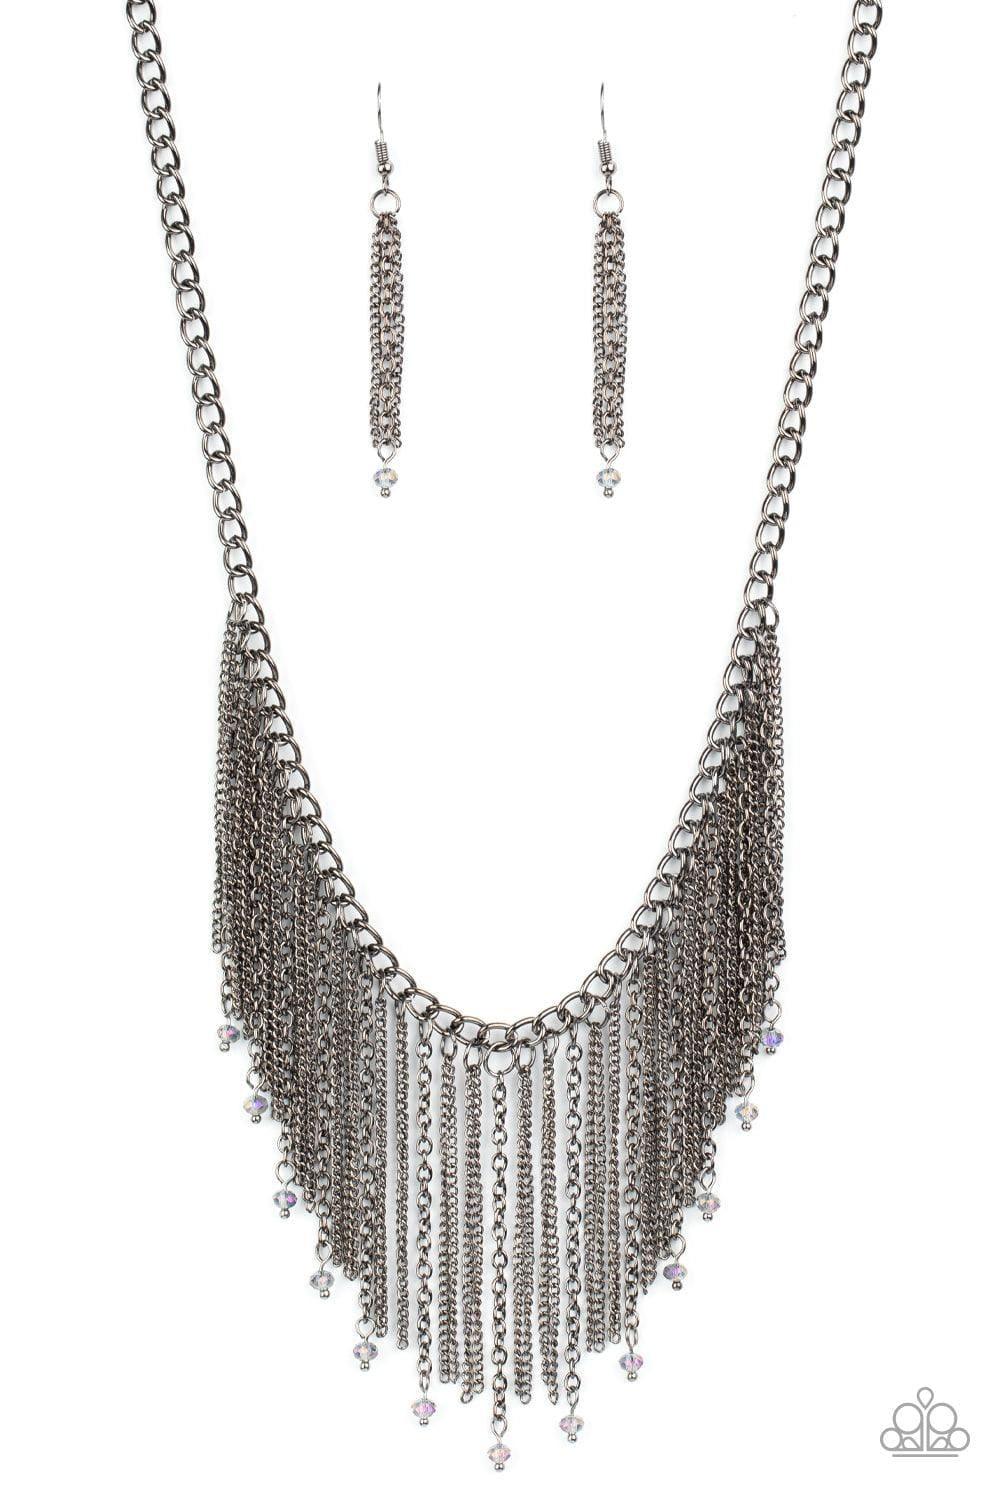 Paparazzi Accessories - Cue The Fireworks - Multicolor Necklace - Bling by JessieK